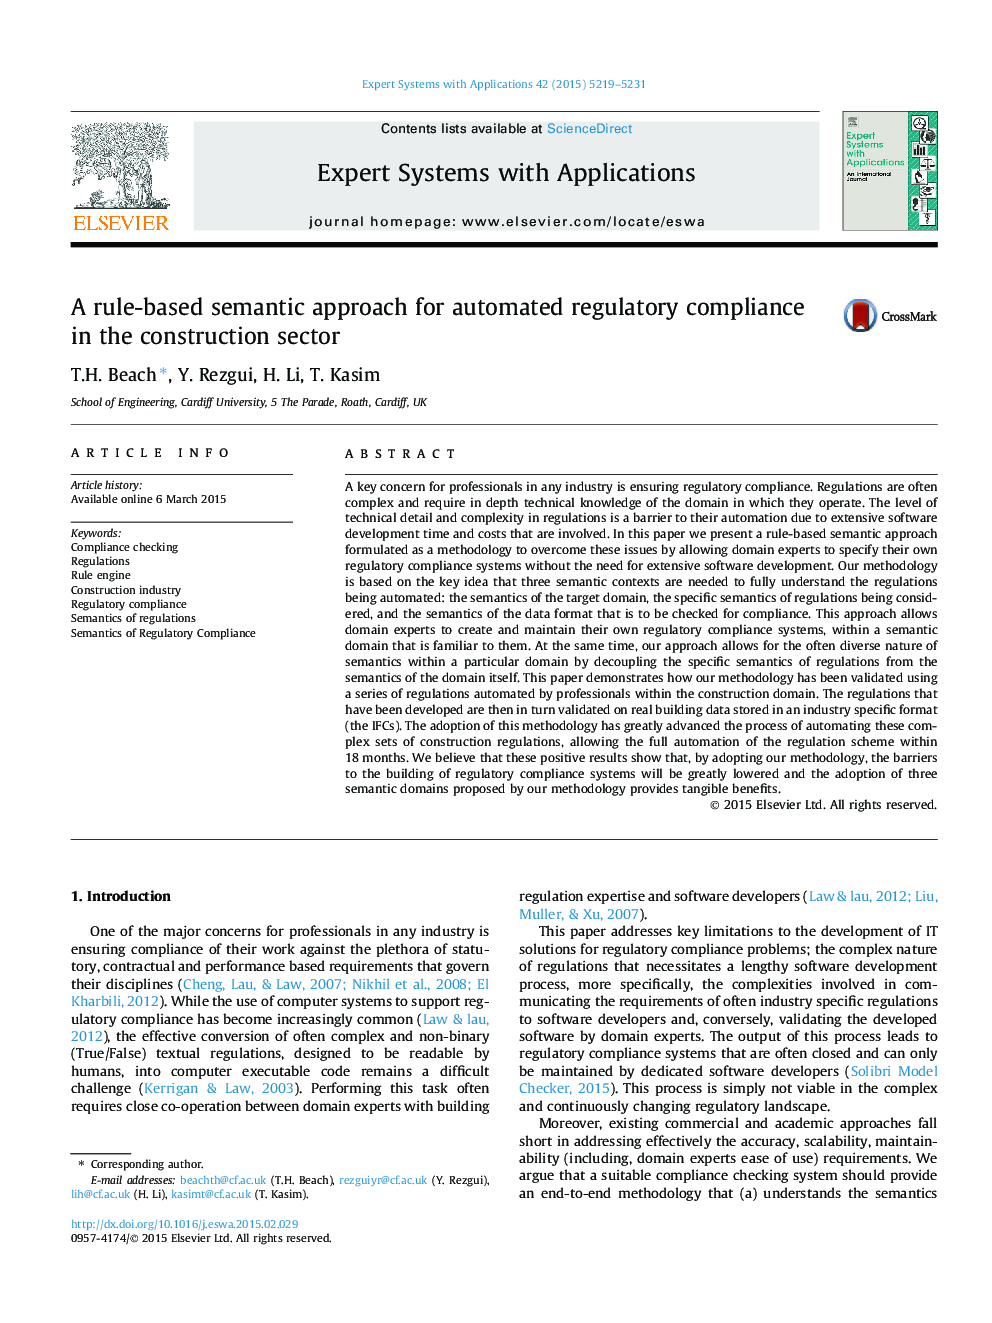 A rule-based semantic approach for automated regulatory compliance in the construction sector